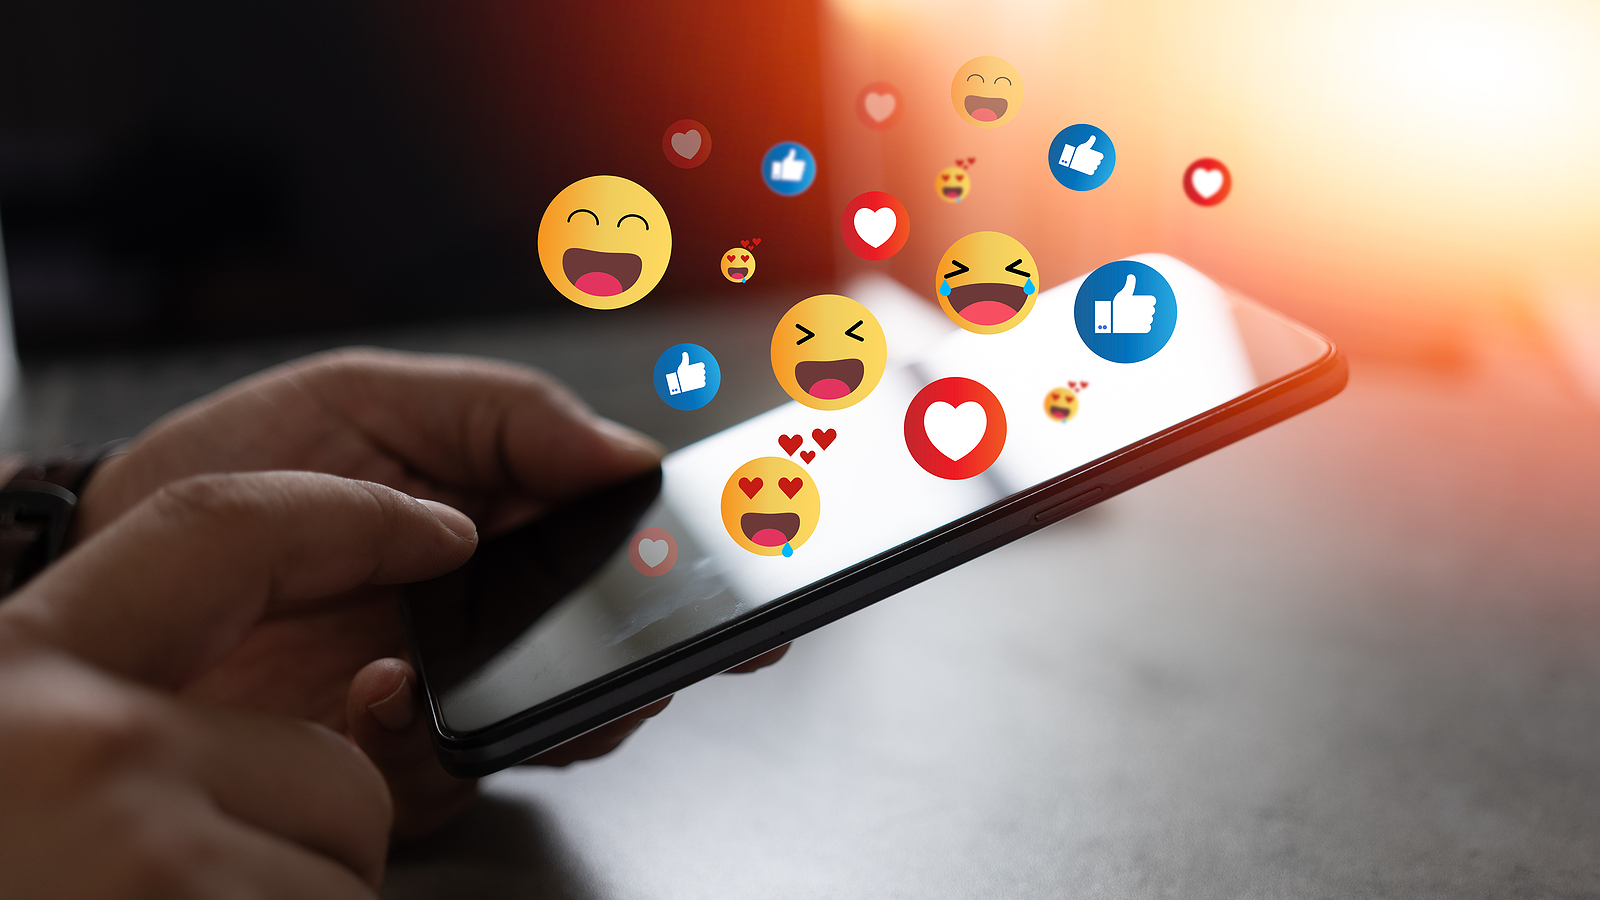 How Does Social Media Have A Bad Impact On Mental Health?